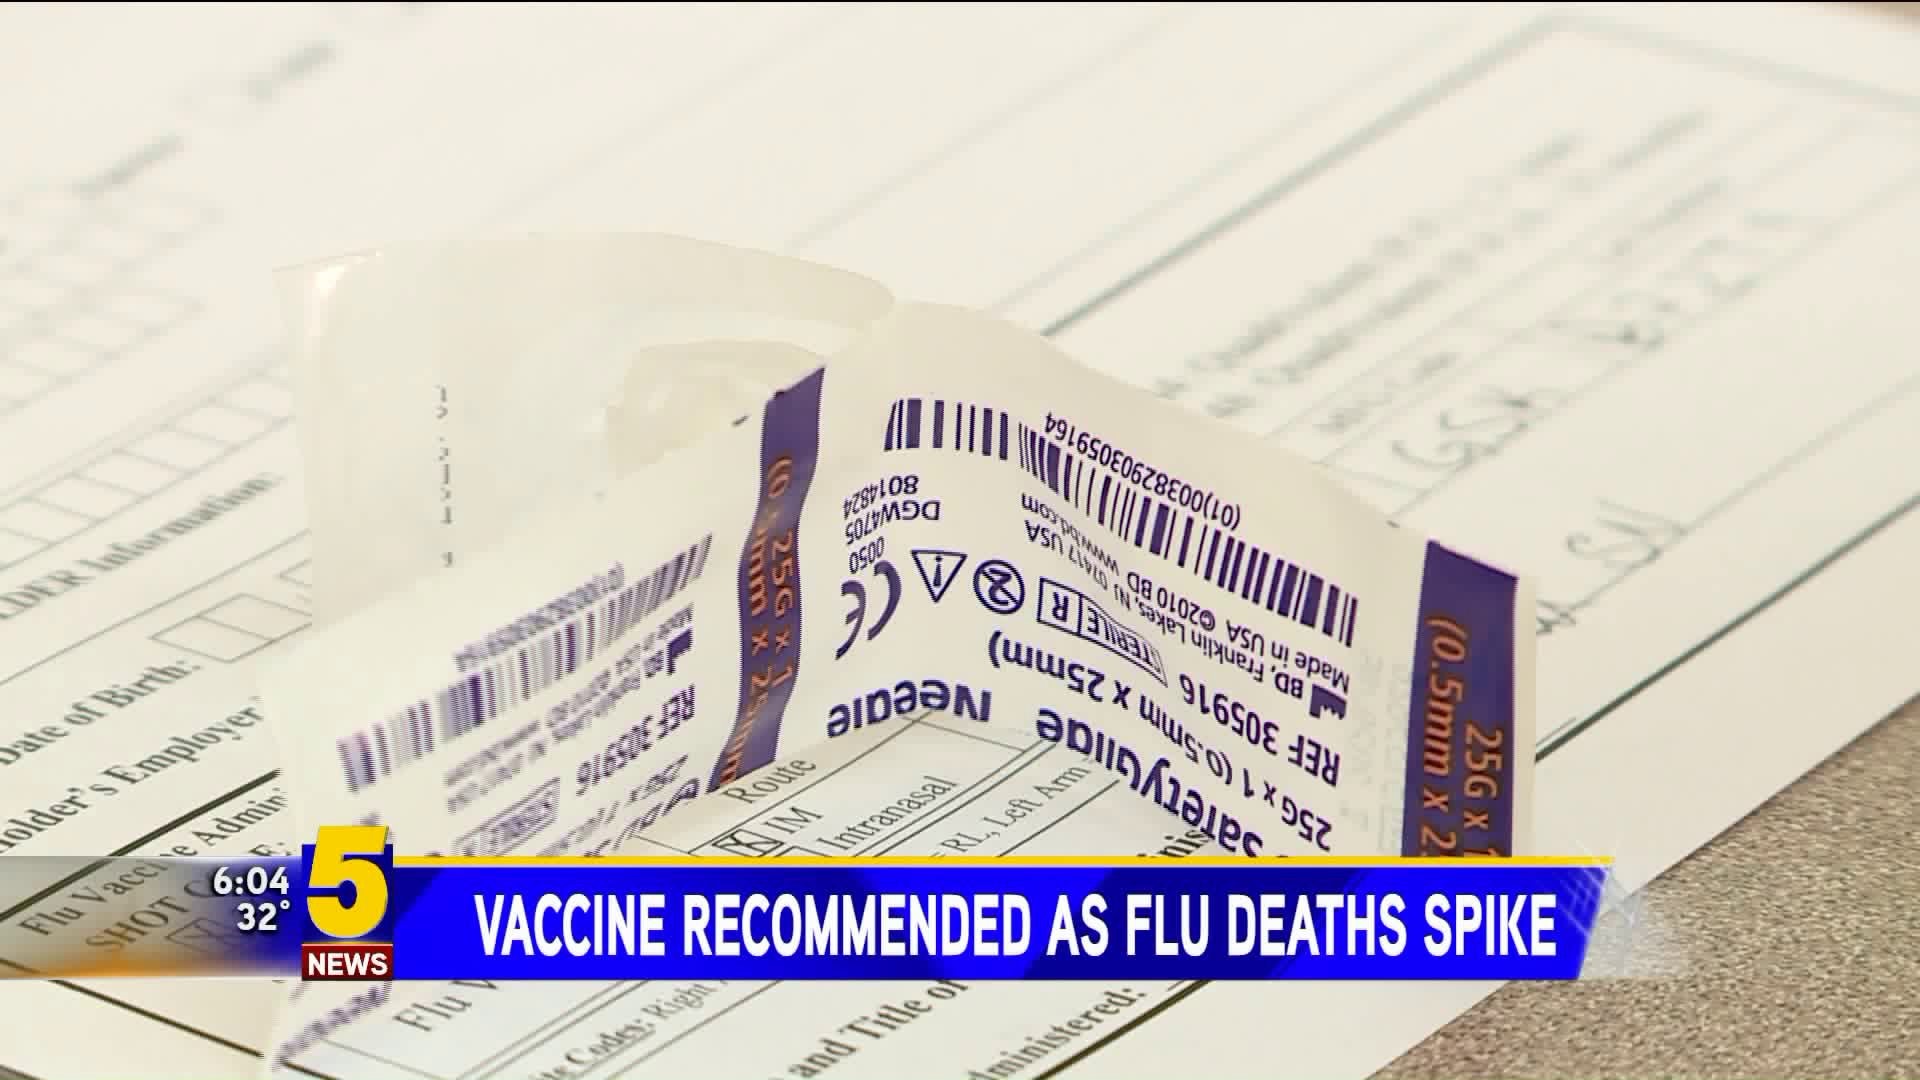 Vaccine Recommended as Flu Deaths Spike